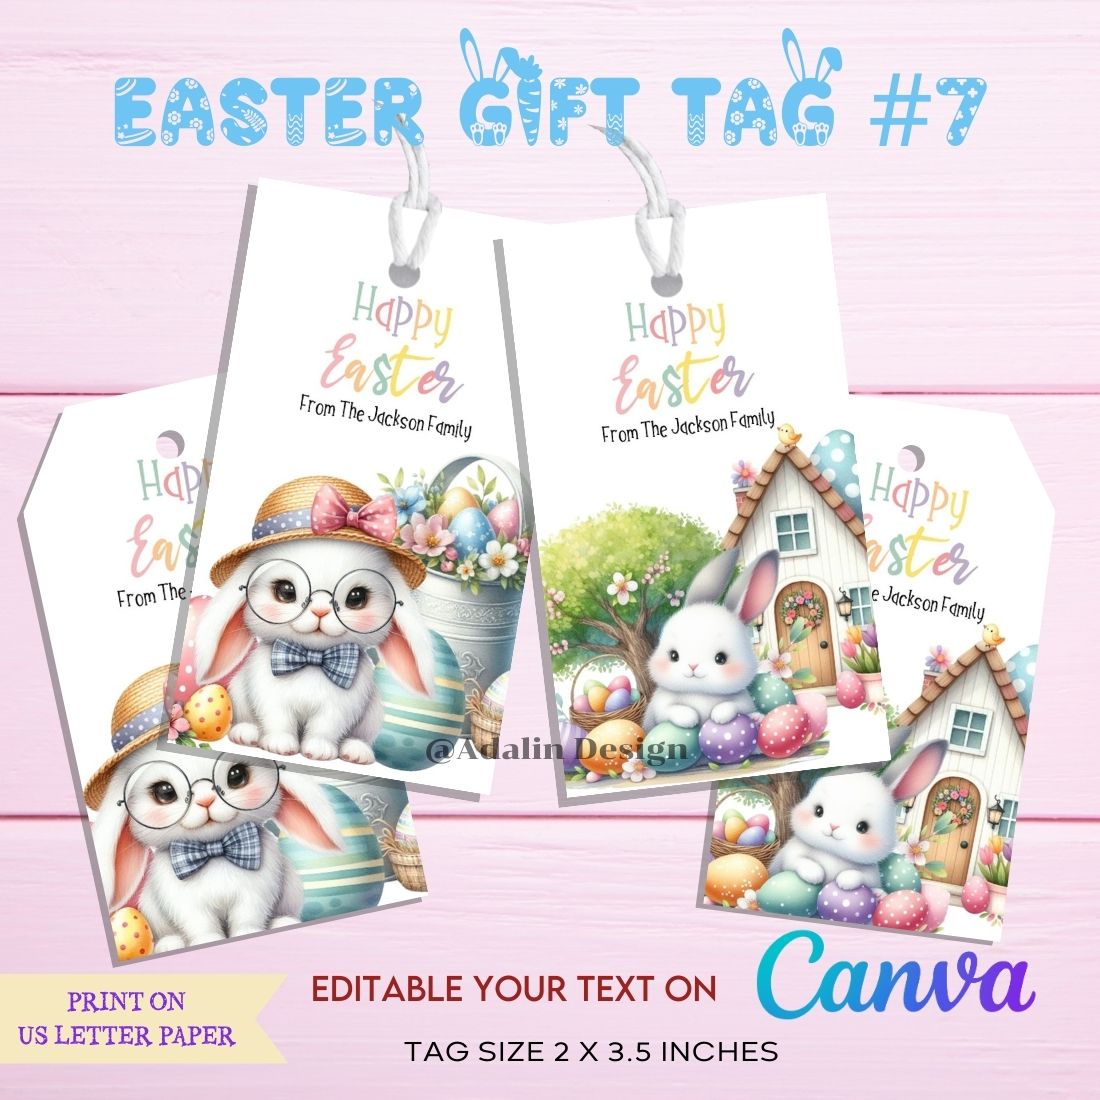 Easter Gift Tag #7 cover image.